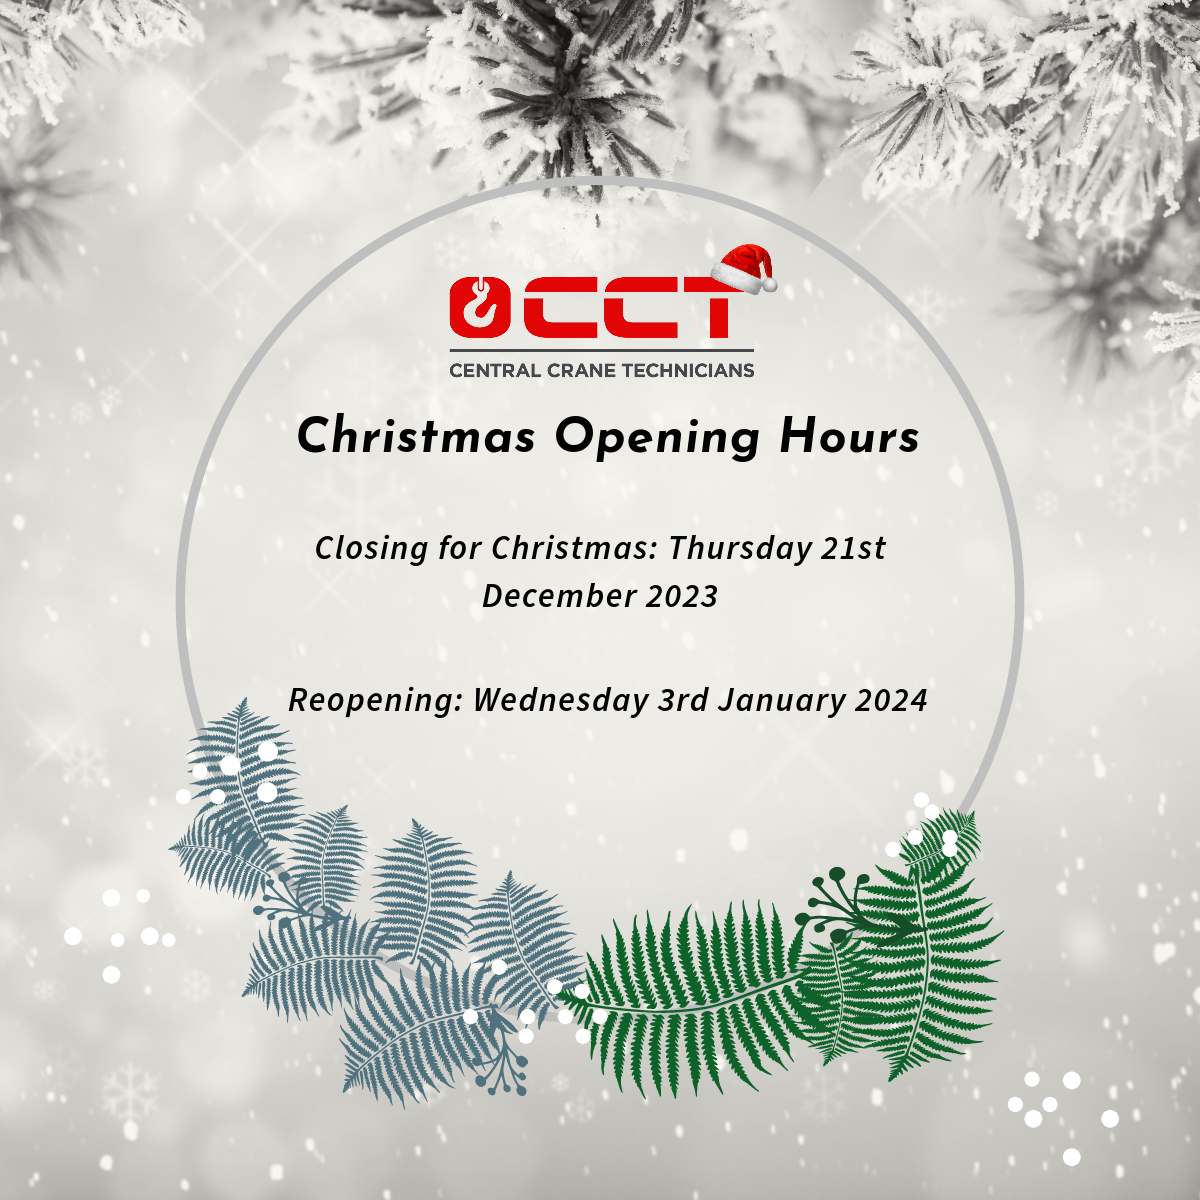 CCT Christmas Opening Hours